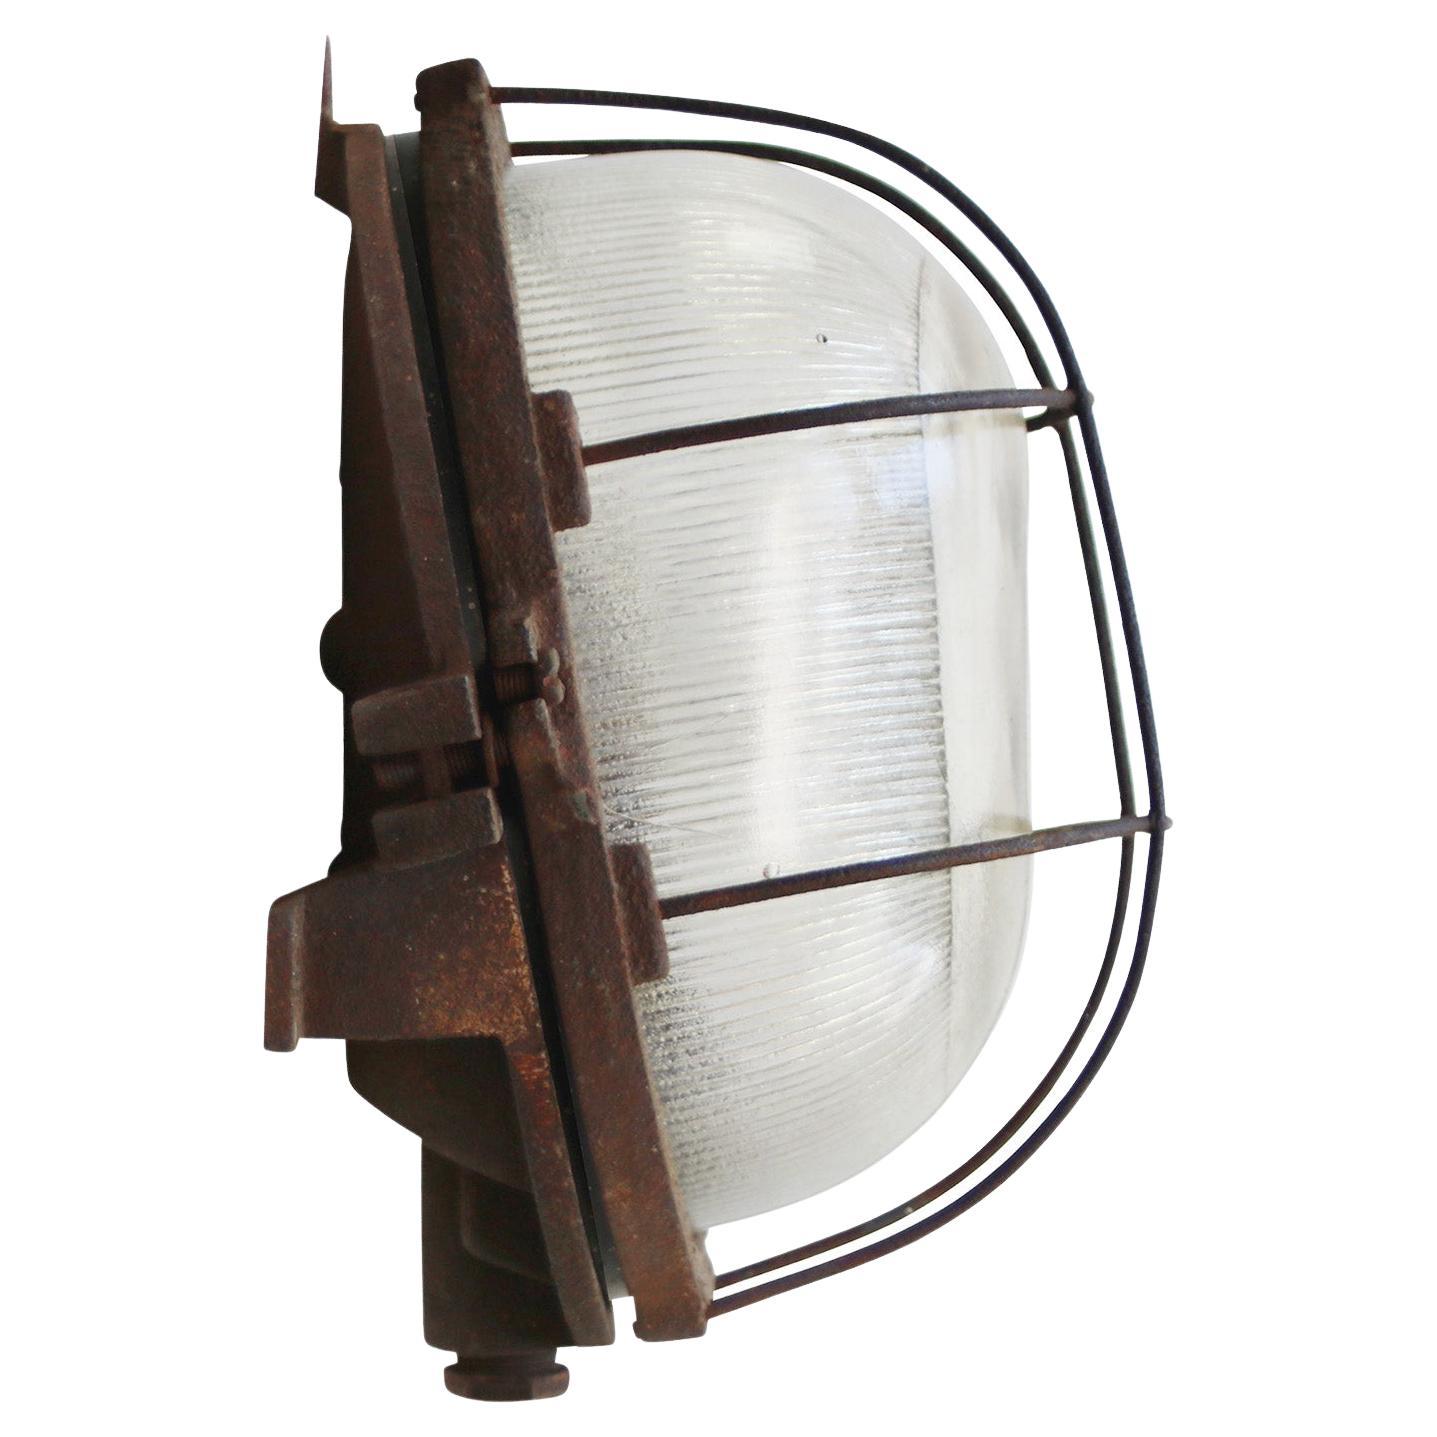 Rust iron factory wall
Cast iron clear striped glass

Weight 5.00 kg / 11 lb

Priced per individual item. All lamps have been made suitable by international standards for incandescent light bulbs, energy-efficient and LED bulbs. The new wiring